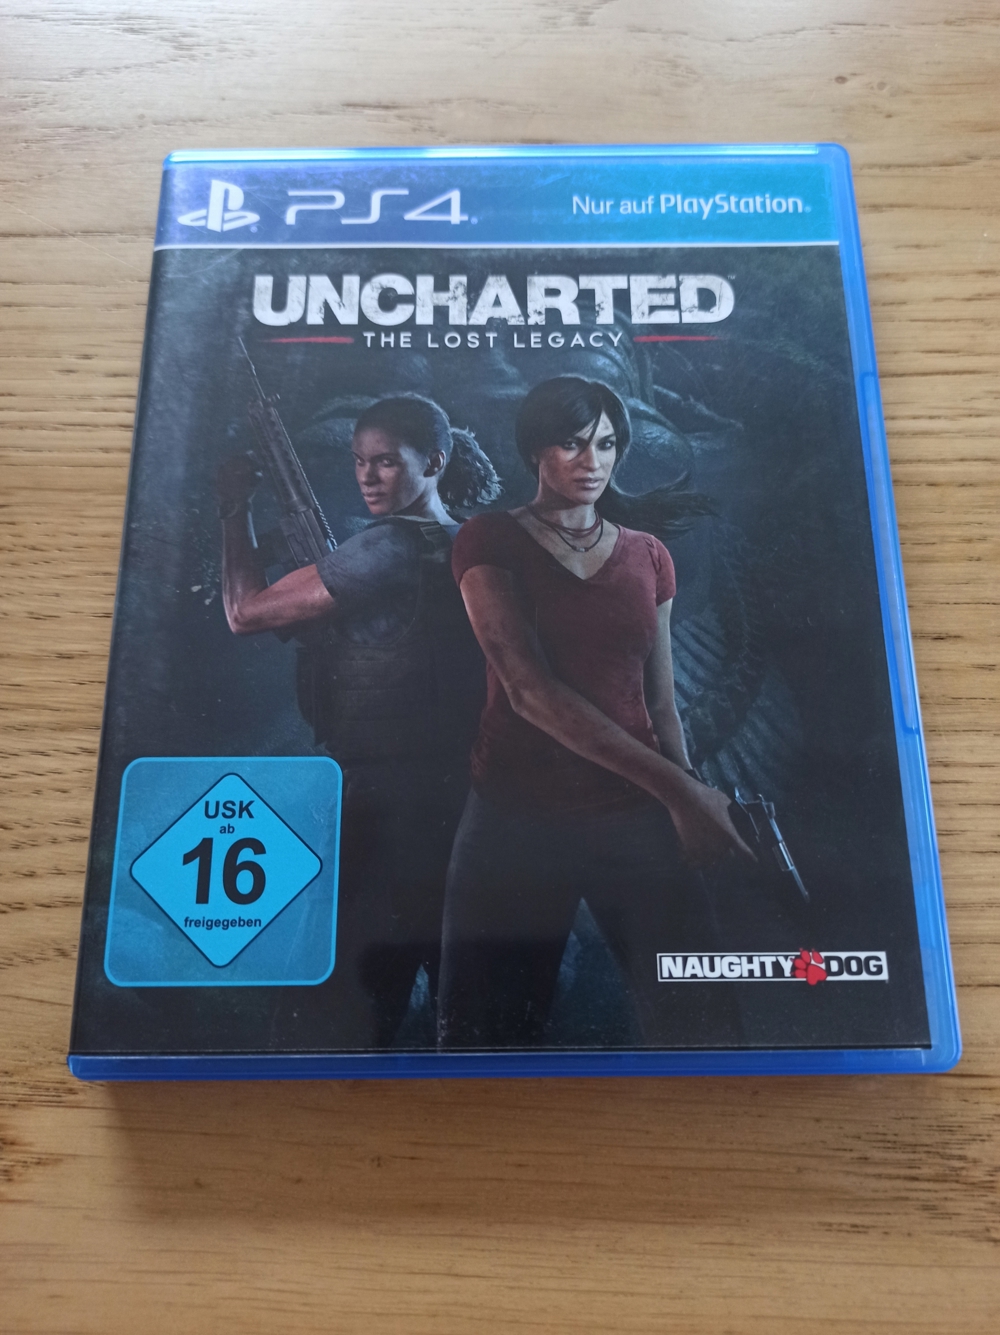 Uncharted ps4